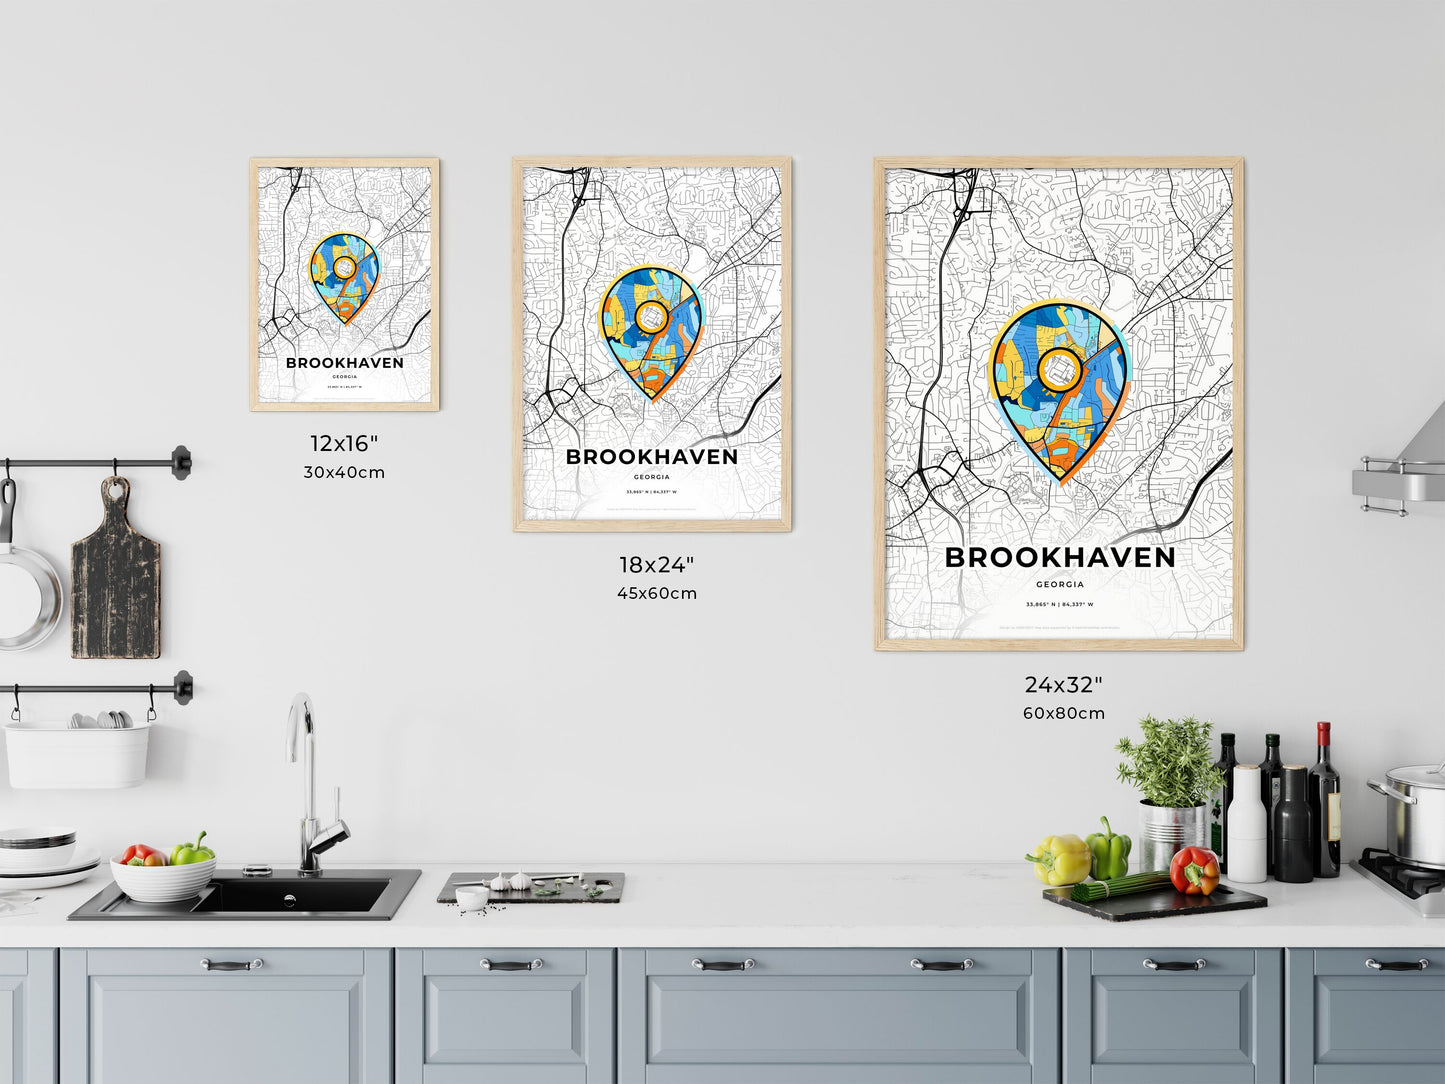 BROOKHAVEN GEORGIA minimal art map with a colorful icon. Where it all began, Couple map gift.